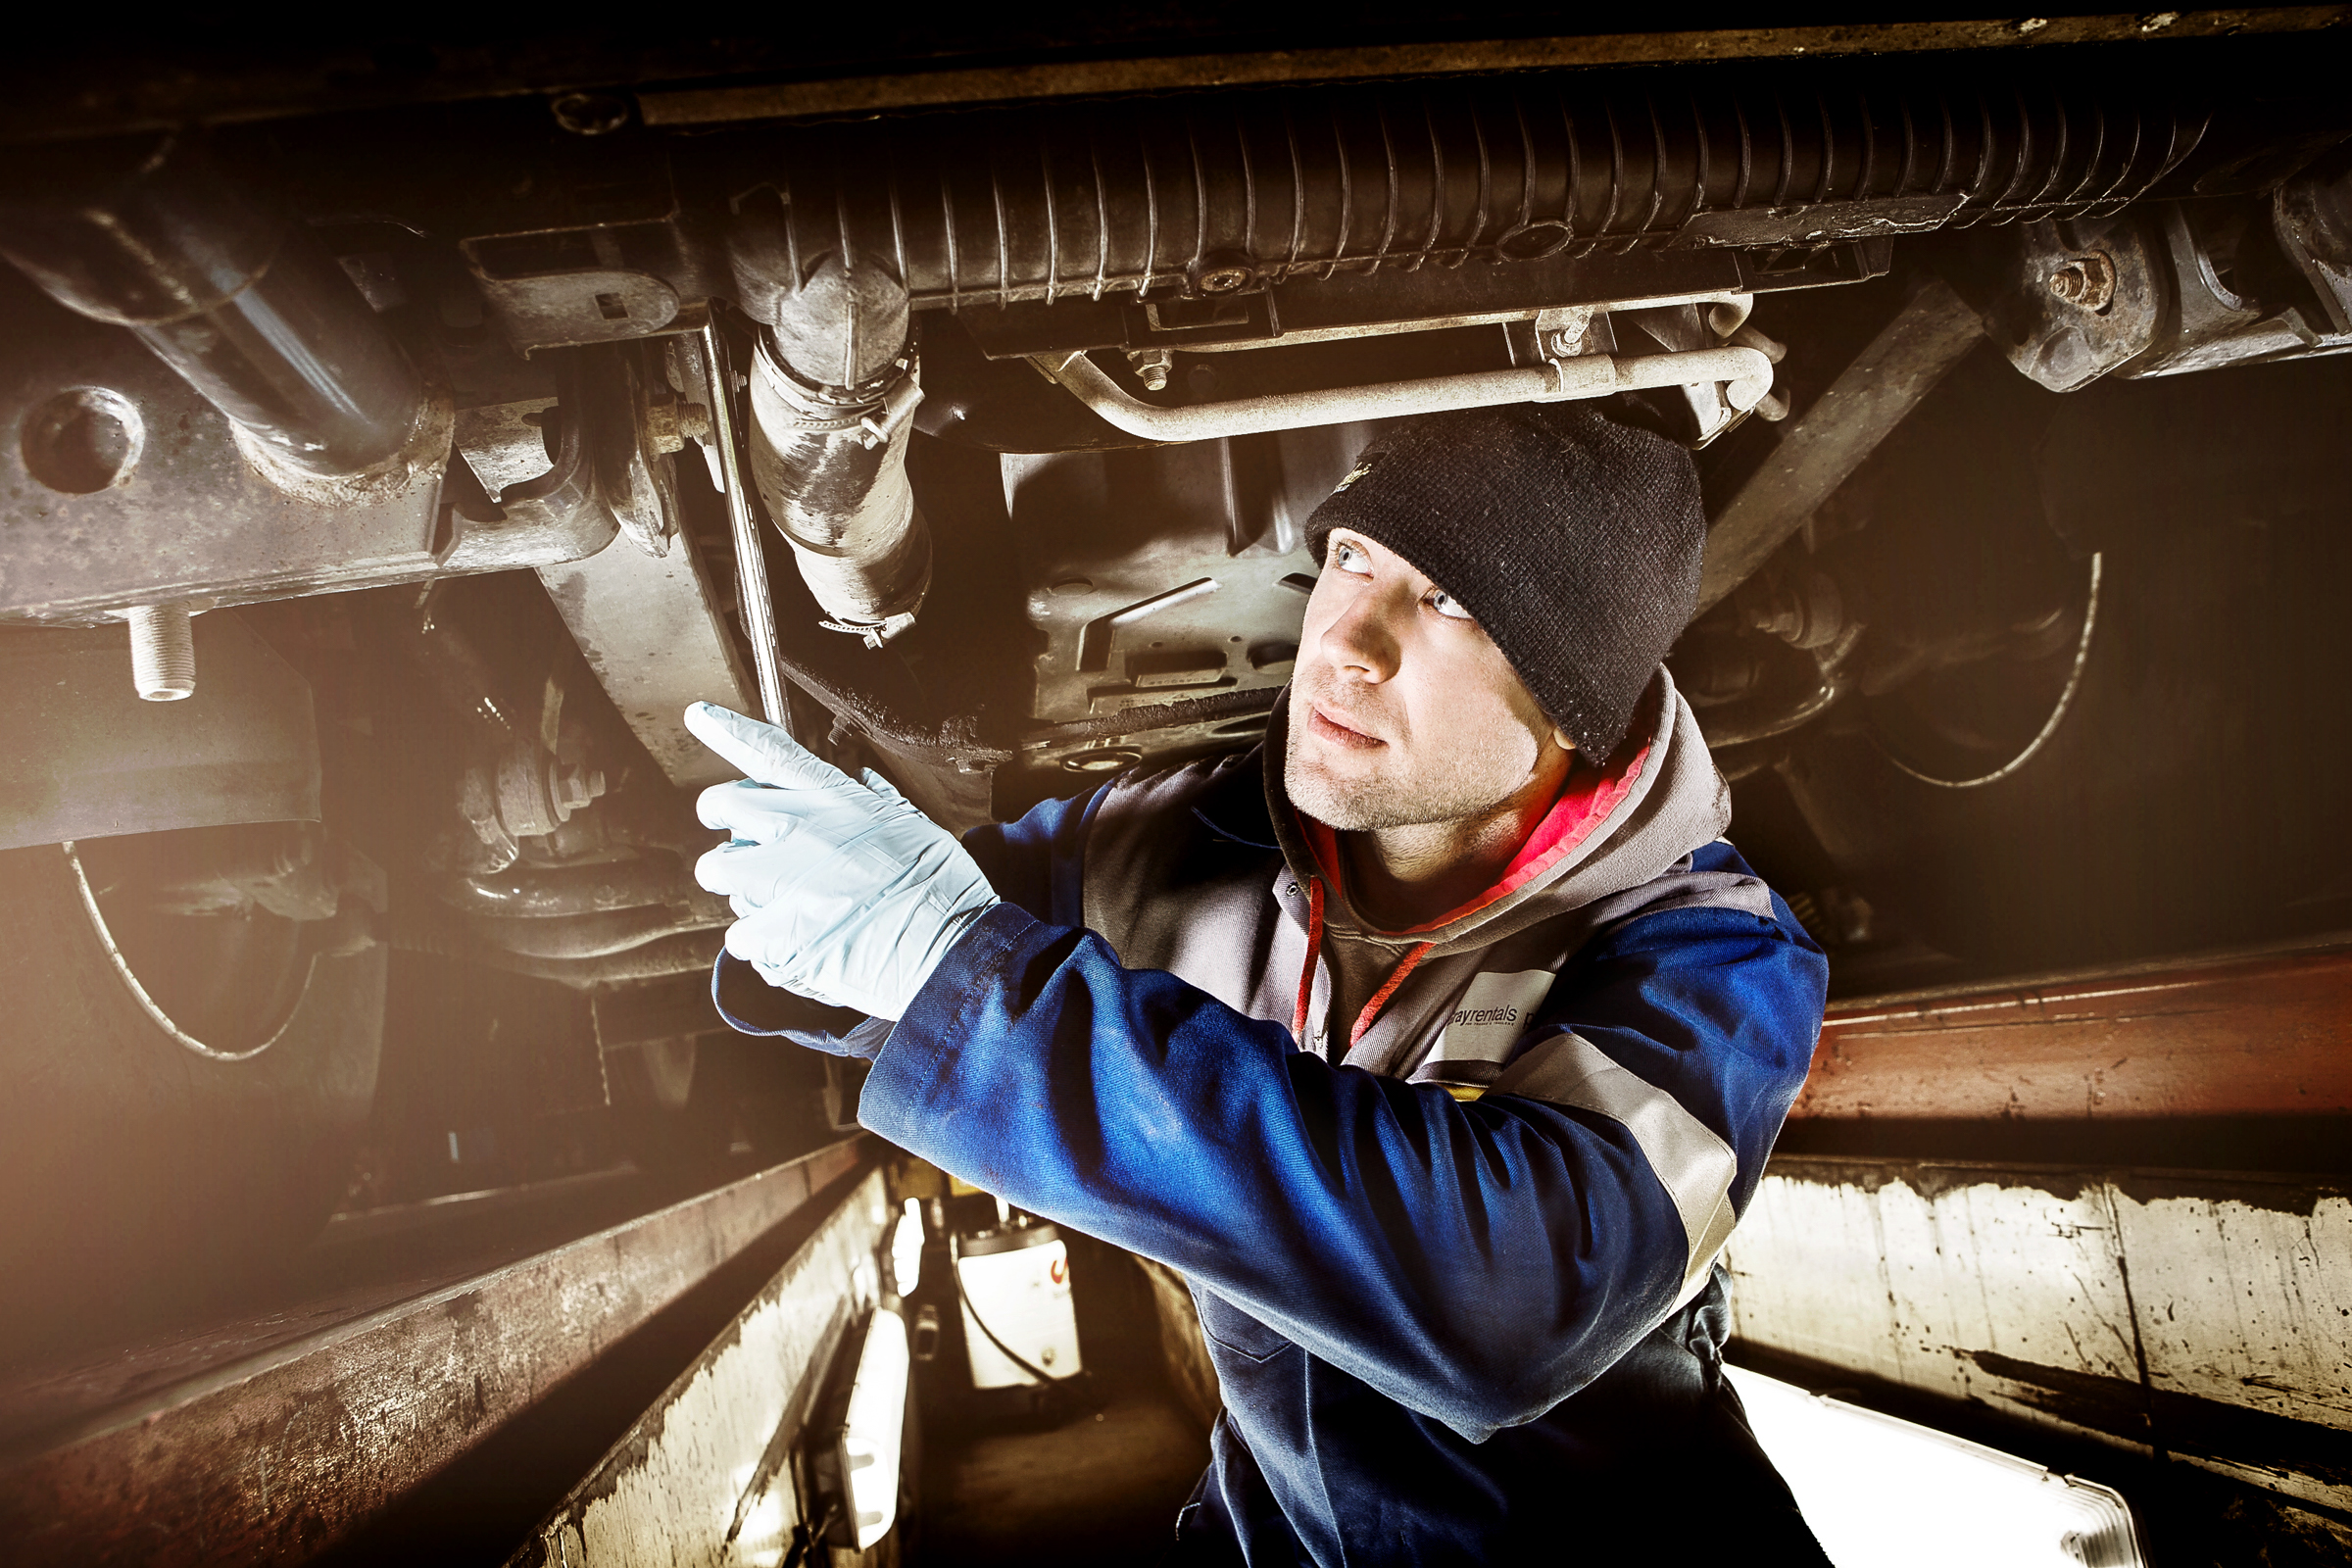 Mechanic working on a truck within an industrial environment.